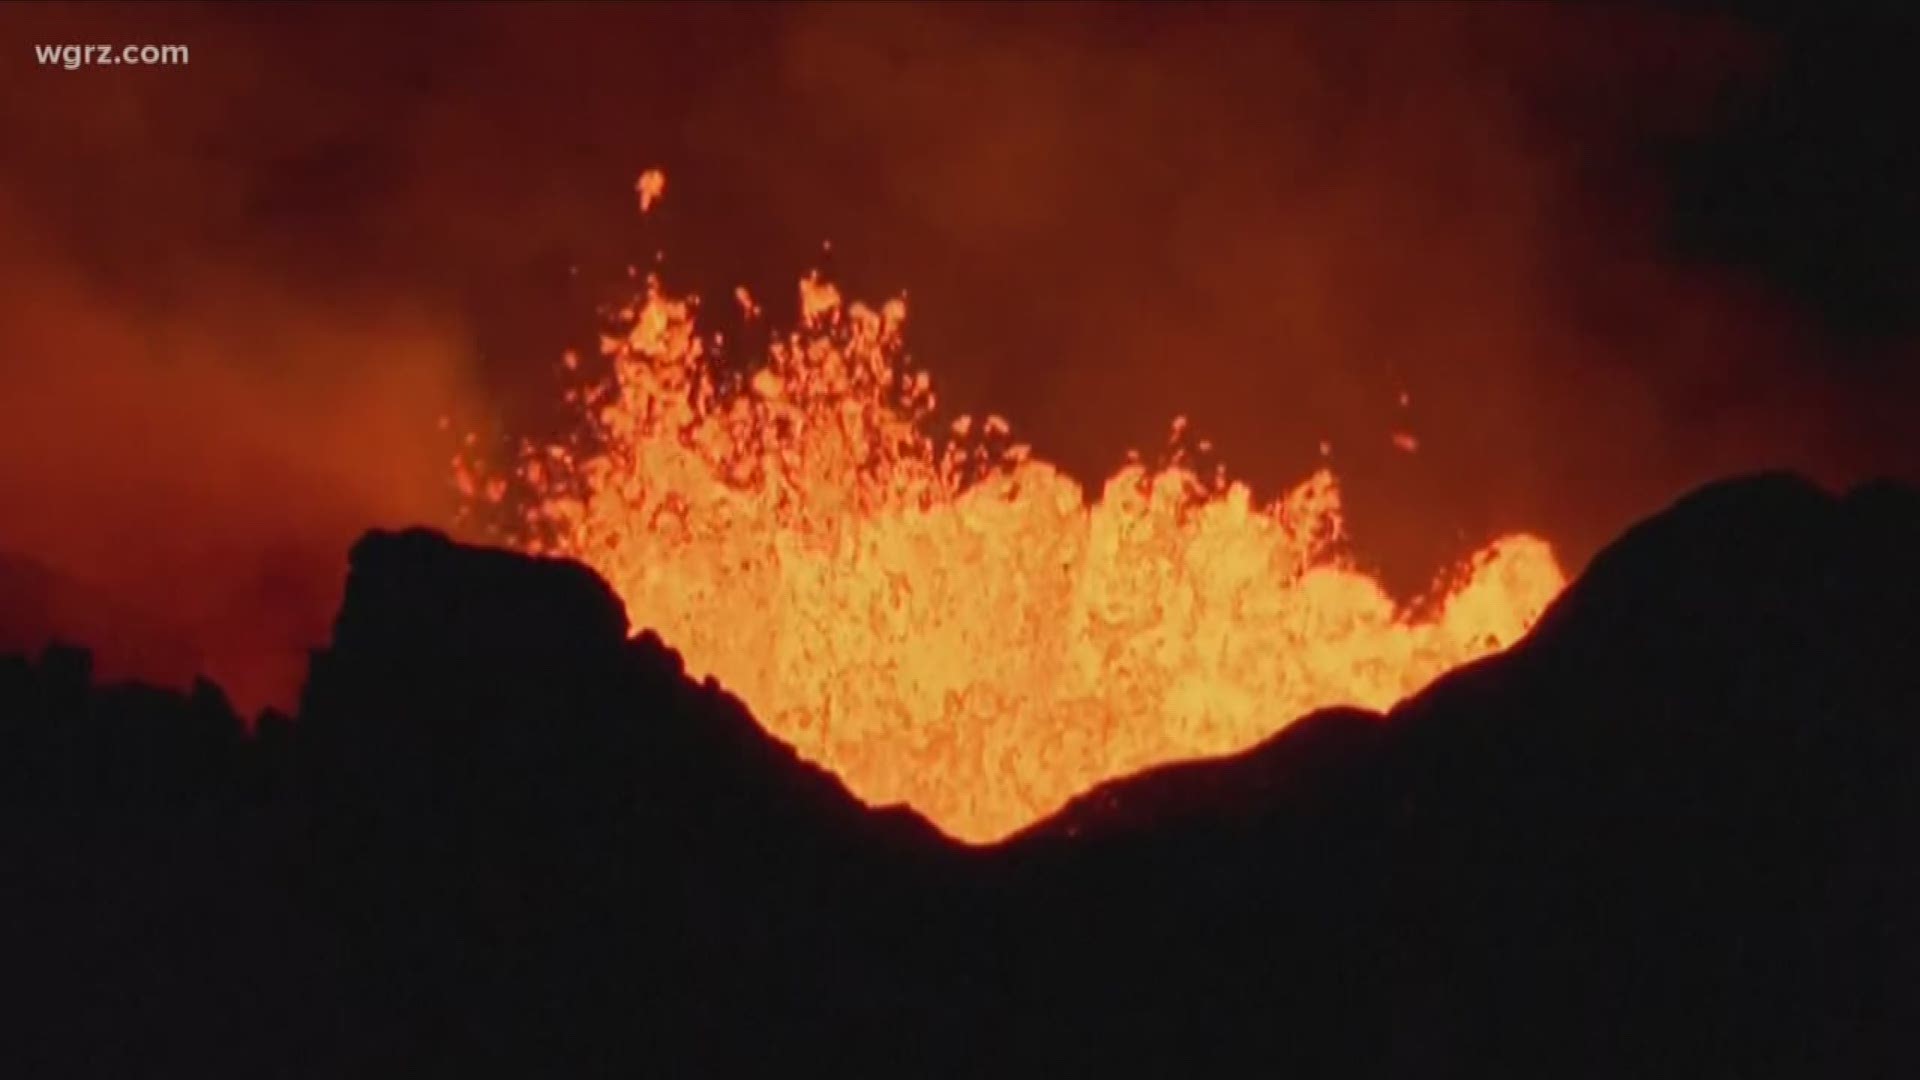 UB scientists are blowing up homemade lava to better understand how volcanic eruptions work.